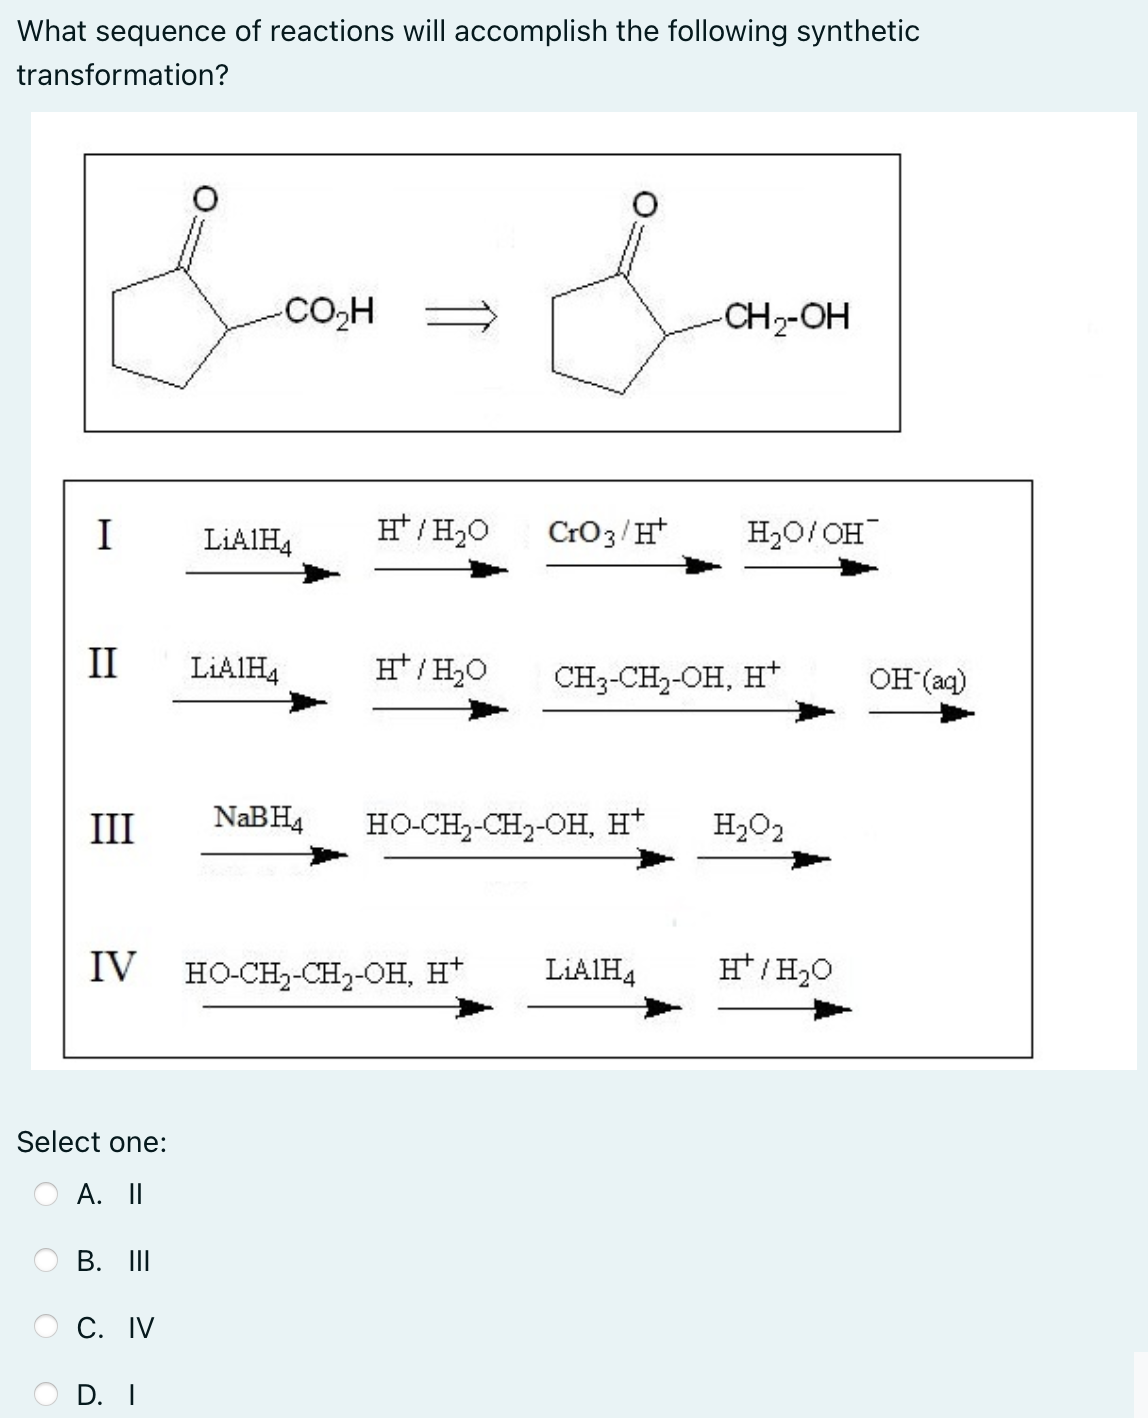 What sequence of reactions will accomplish the following synthetic
transformation?
CO,H =
CH2-OH
I
LIAIH4
H* / H20
CrO3/H*
H20/ OH
II
LIAIH4
H*/ H20
CH3-CH2-OH, H*
OH (aq)
III
NABH4
HO-CH2-CH2-OH, H*
H2O2
IV
HO-CH2-CH2-OH, H*
LIAIH4
/H2O
Select one:
А. П
В. I
С. IV
O D. I
